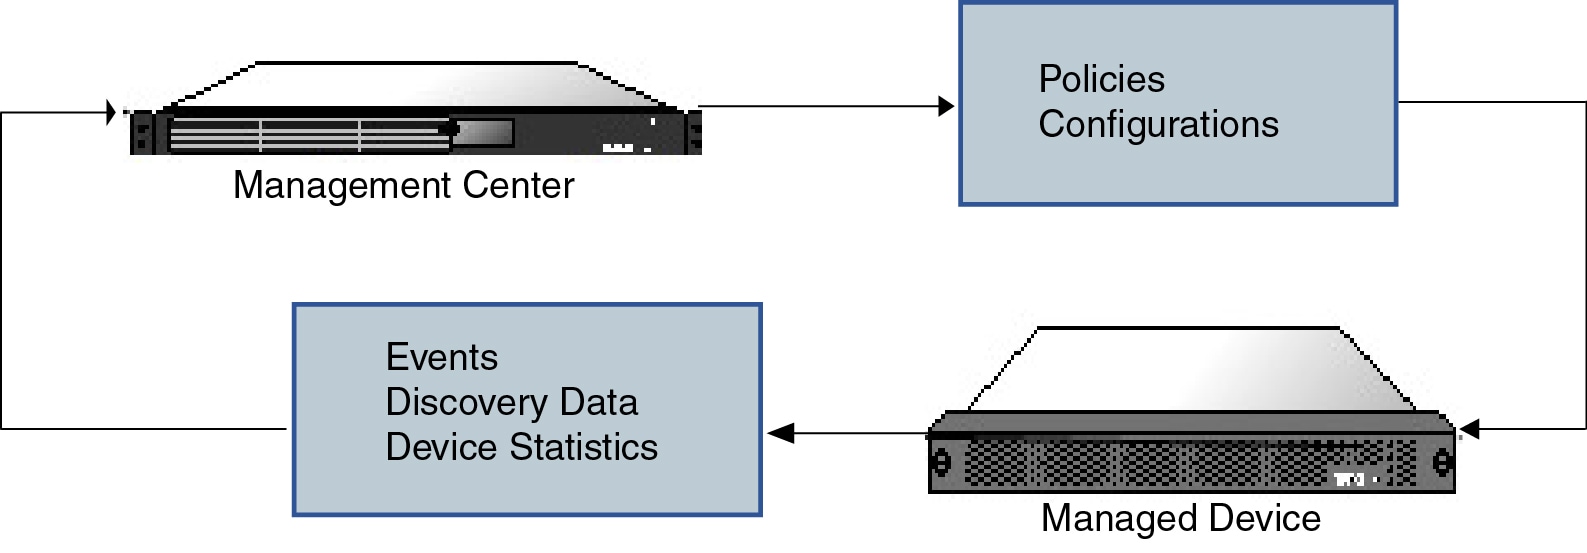 Diagram illustrating information passed between a FMC and its managed devices. Policy and configuration information is passed from the FMC to the managed devices. Events, discovery data, and device statistics are passed from the managed devices to the FMC.